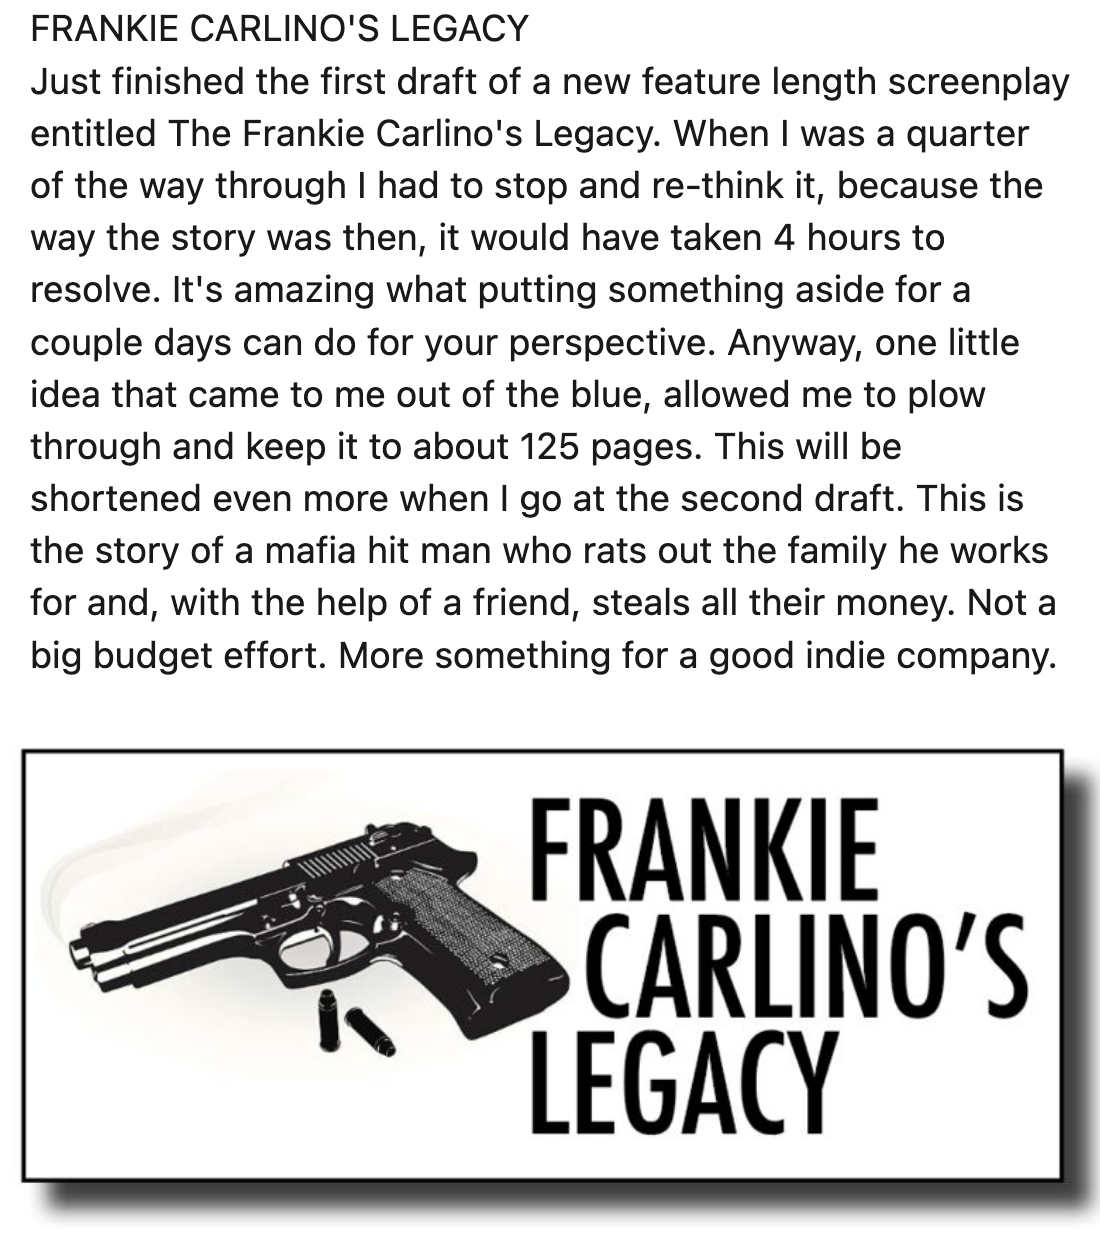 FRANKIE CARLINO'S LEGACY

Just finished the first draft of a new feature length screenplay
entitled The Frankie Carlino's Legacy. When | was a quarter
of the way through | had to stop and re-think it, because the
way the story was then, it would have taken 4 hours to
resolve. It's amazing what putting something aside for a
couple days can do for your perspective. Anyway, one little
idea that came to me out of the blue, allowed me to plow
through and keep it to about 125 pages. This will be
shortened even more when | go at the second draft. This is
the story of a mafia hit man who rats out the family he works
for and, with the help of a friend, steals all their money. Not a
big budget effort. More something for a good indie company.

FRANKIE
CARLINO'S

 PTEGACY